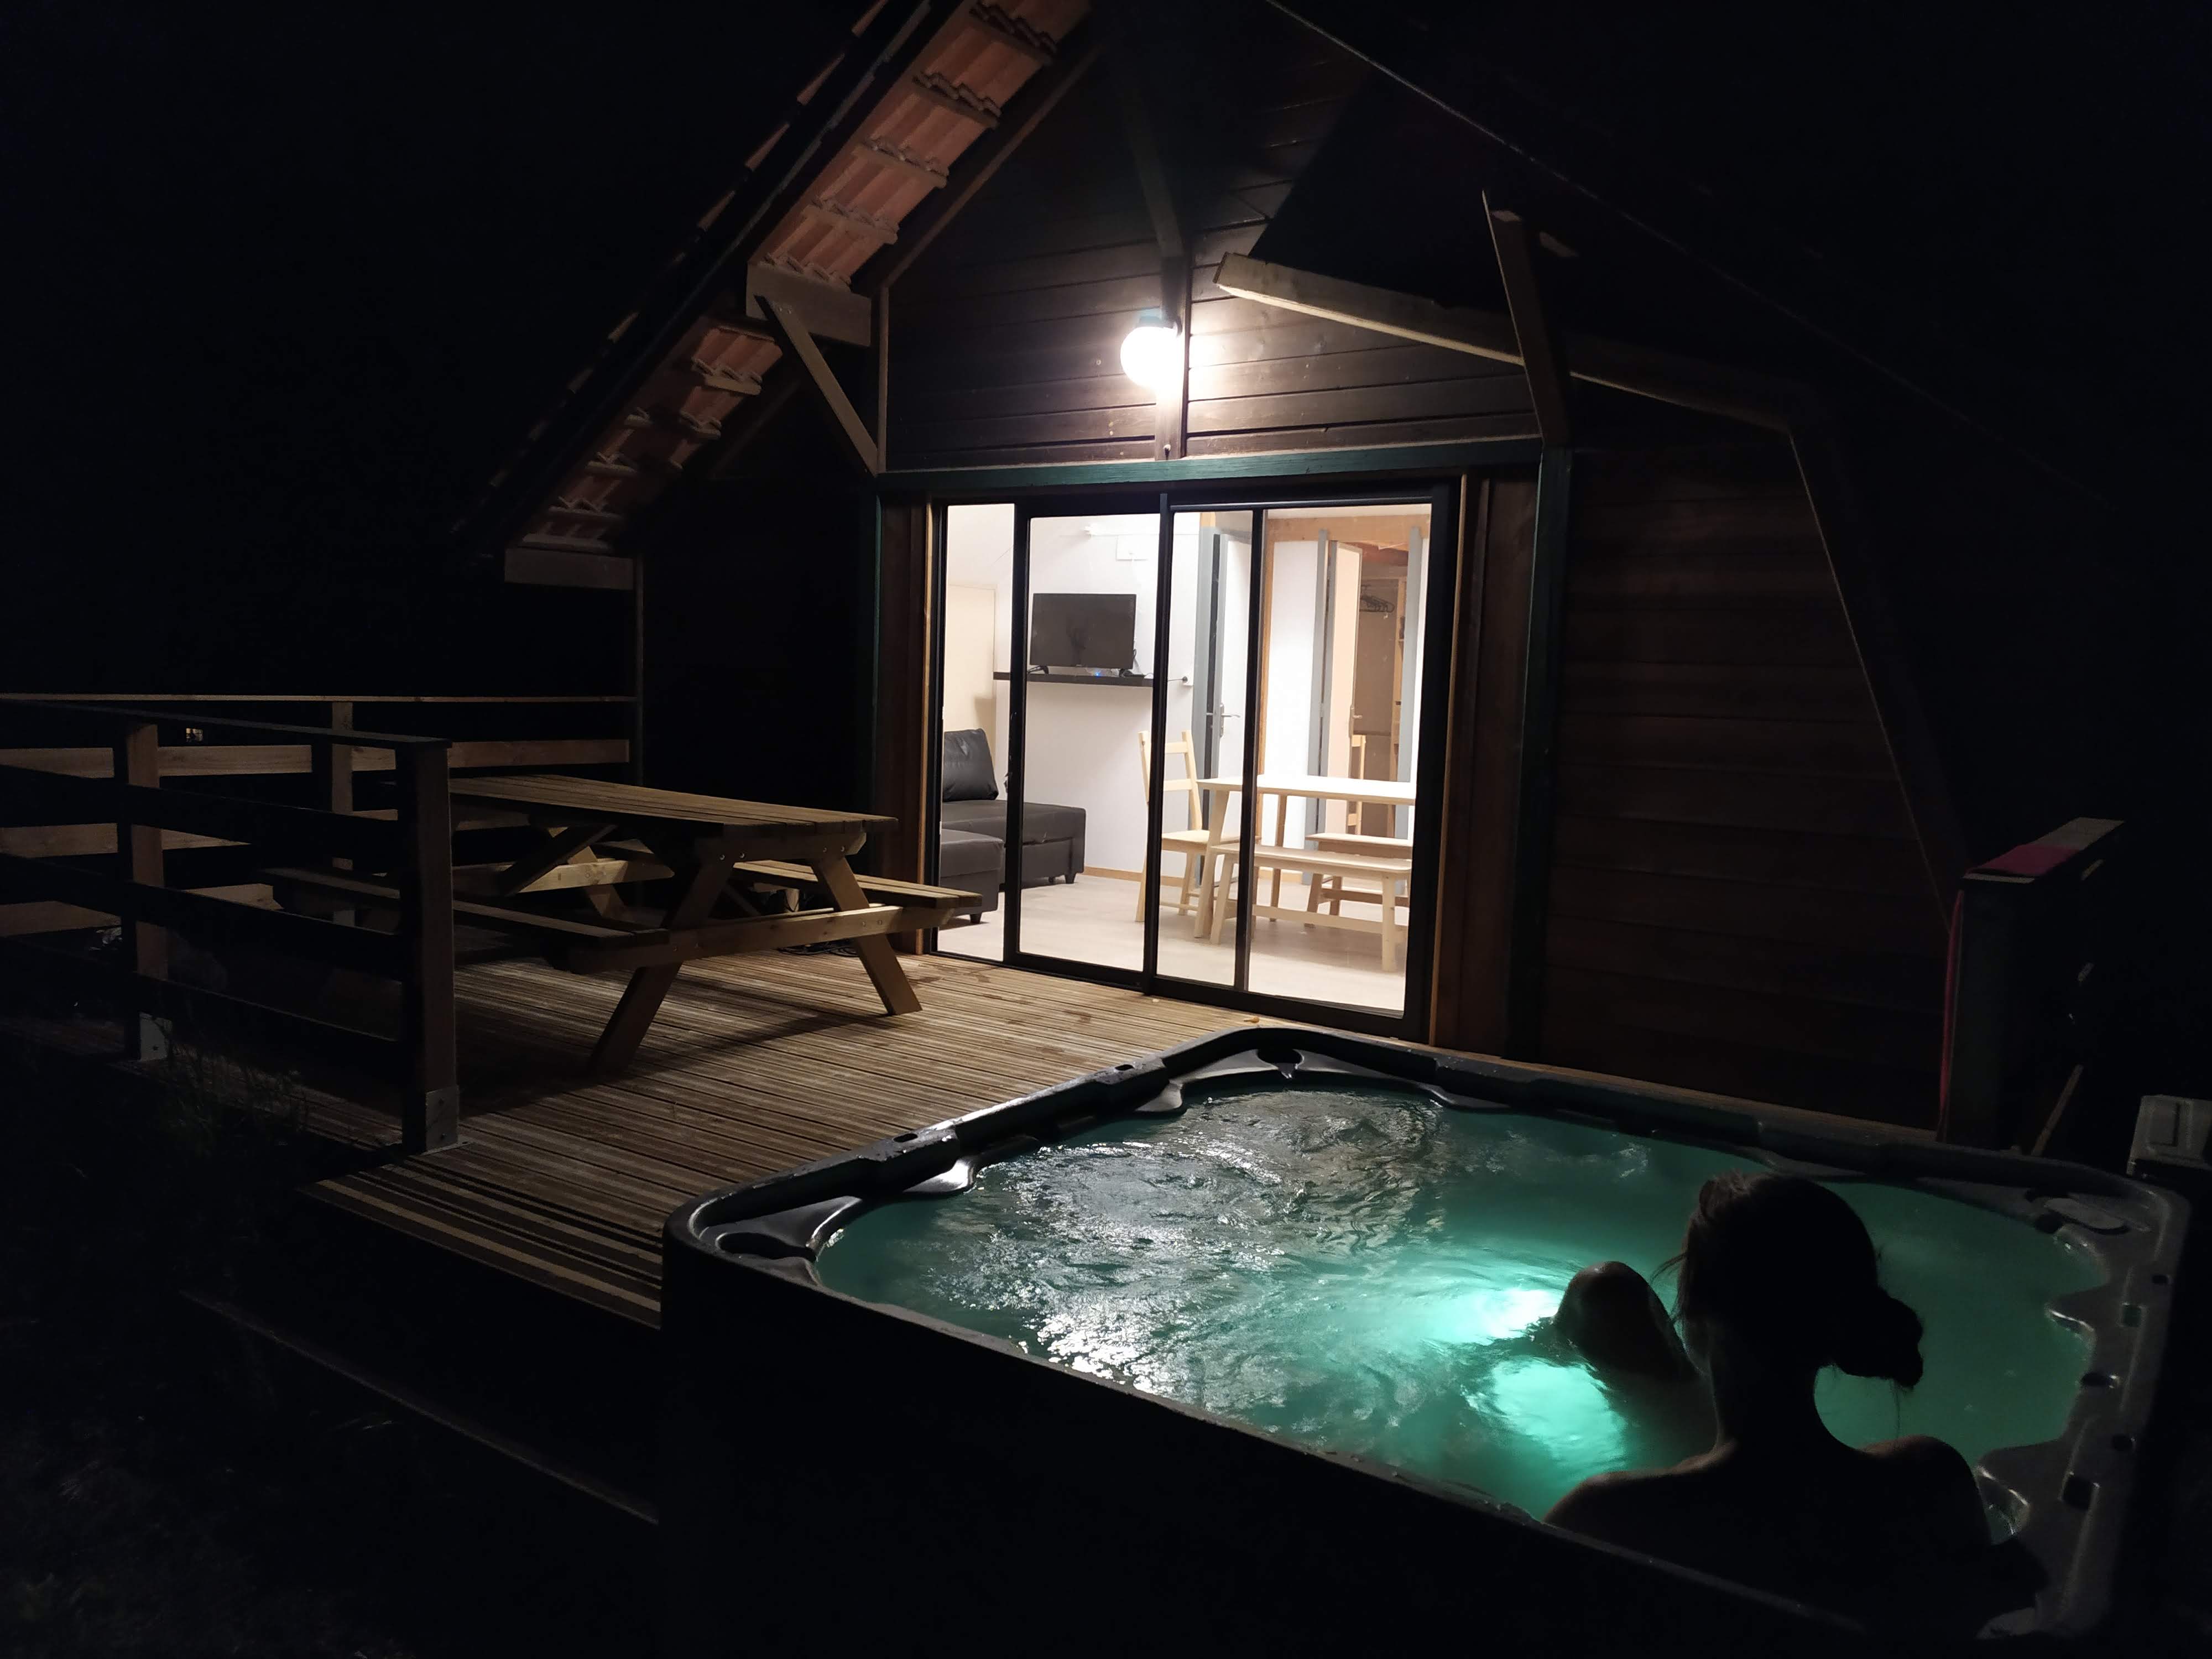 Accommodation - Spa Chalet With Private Jacuzzi + Baby Kit Included - Camping du Domaine de Senaud